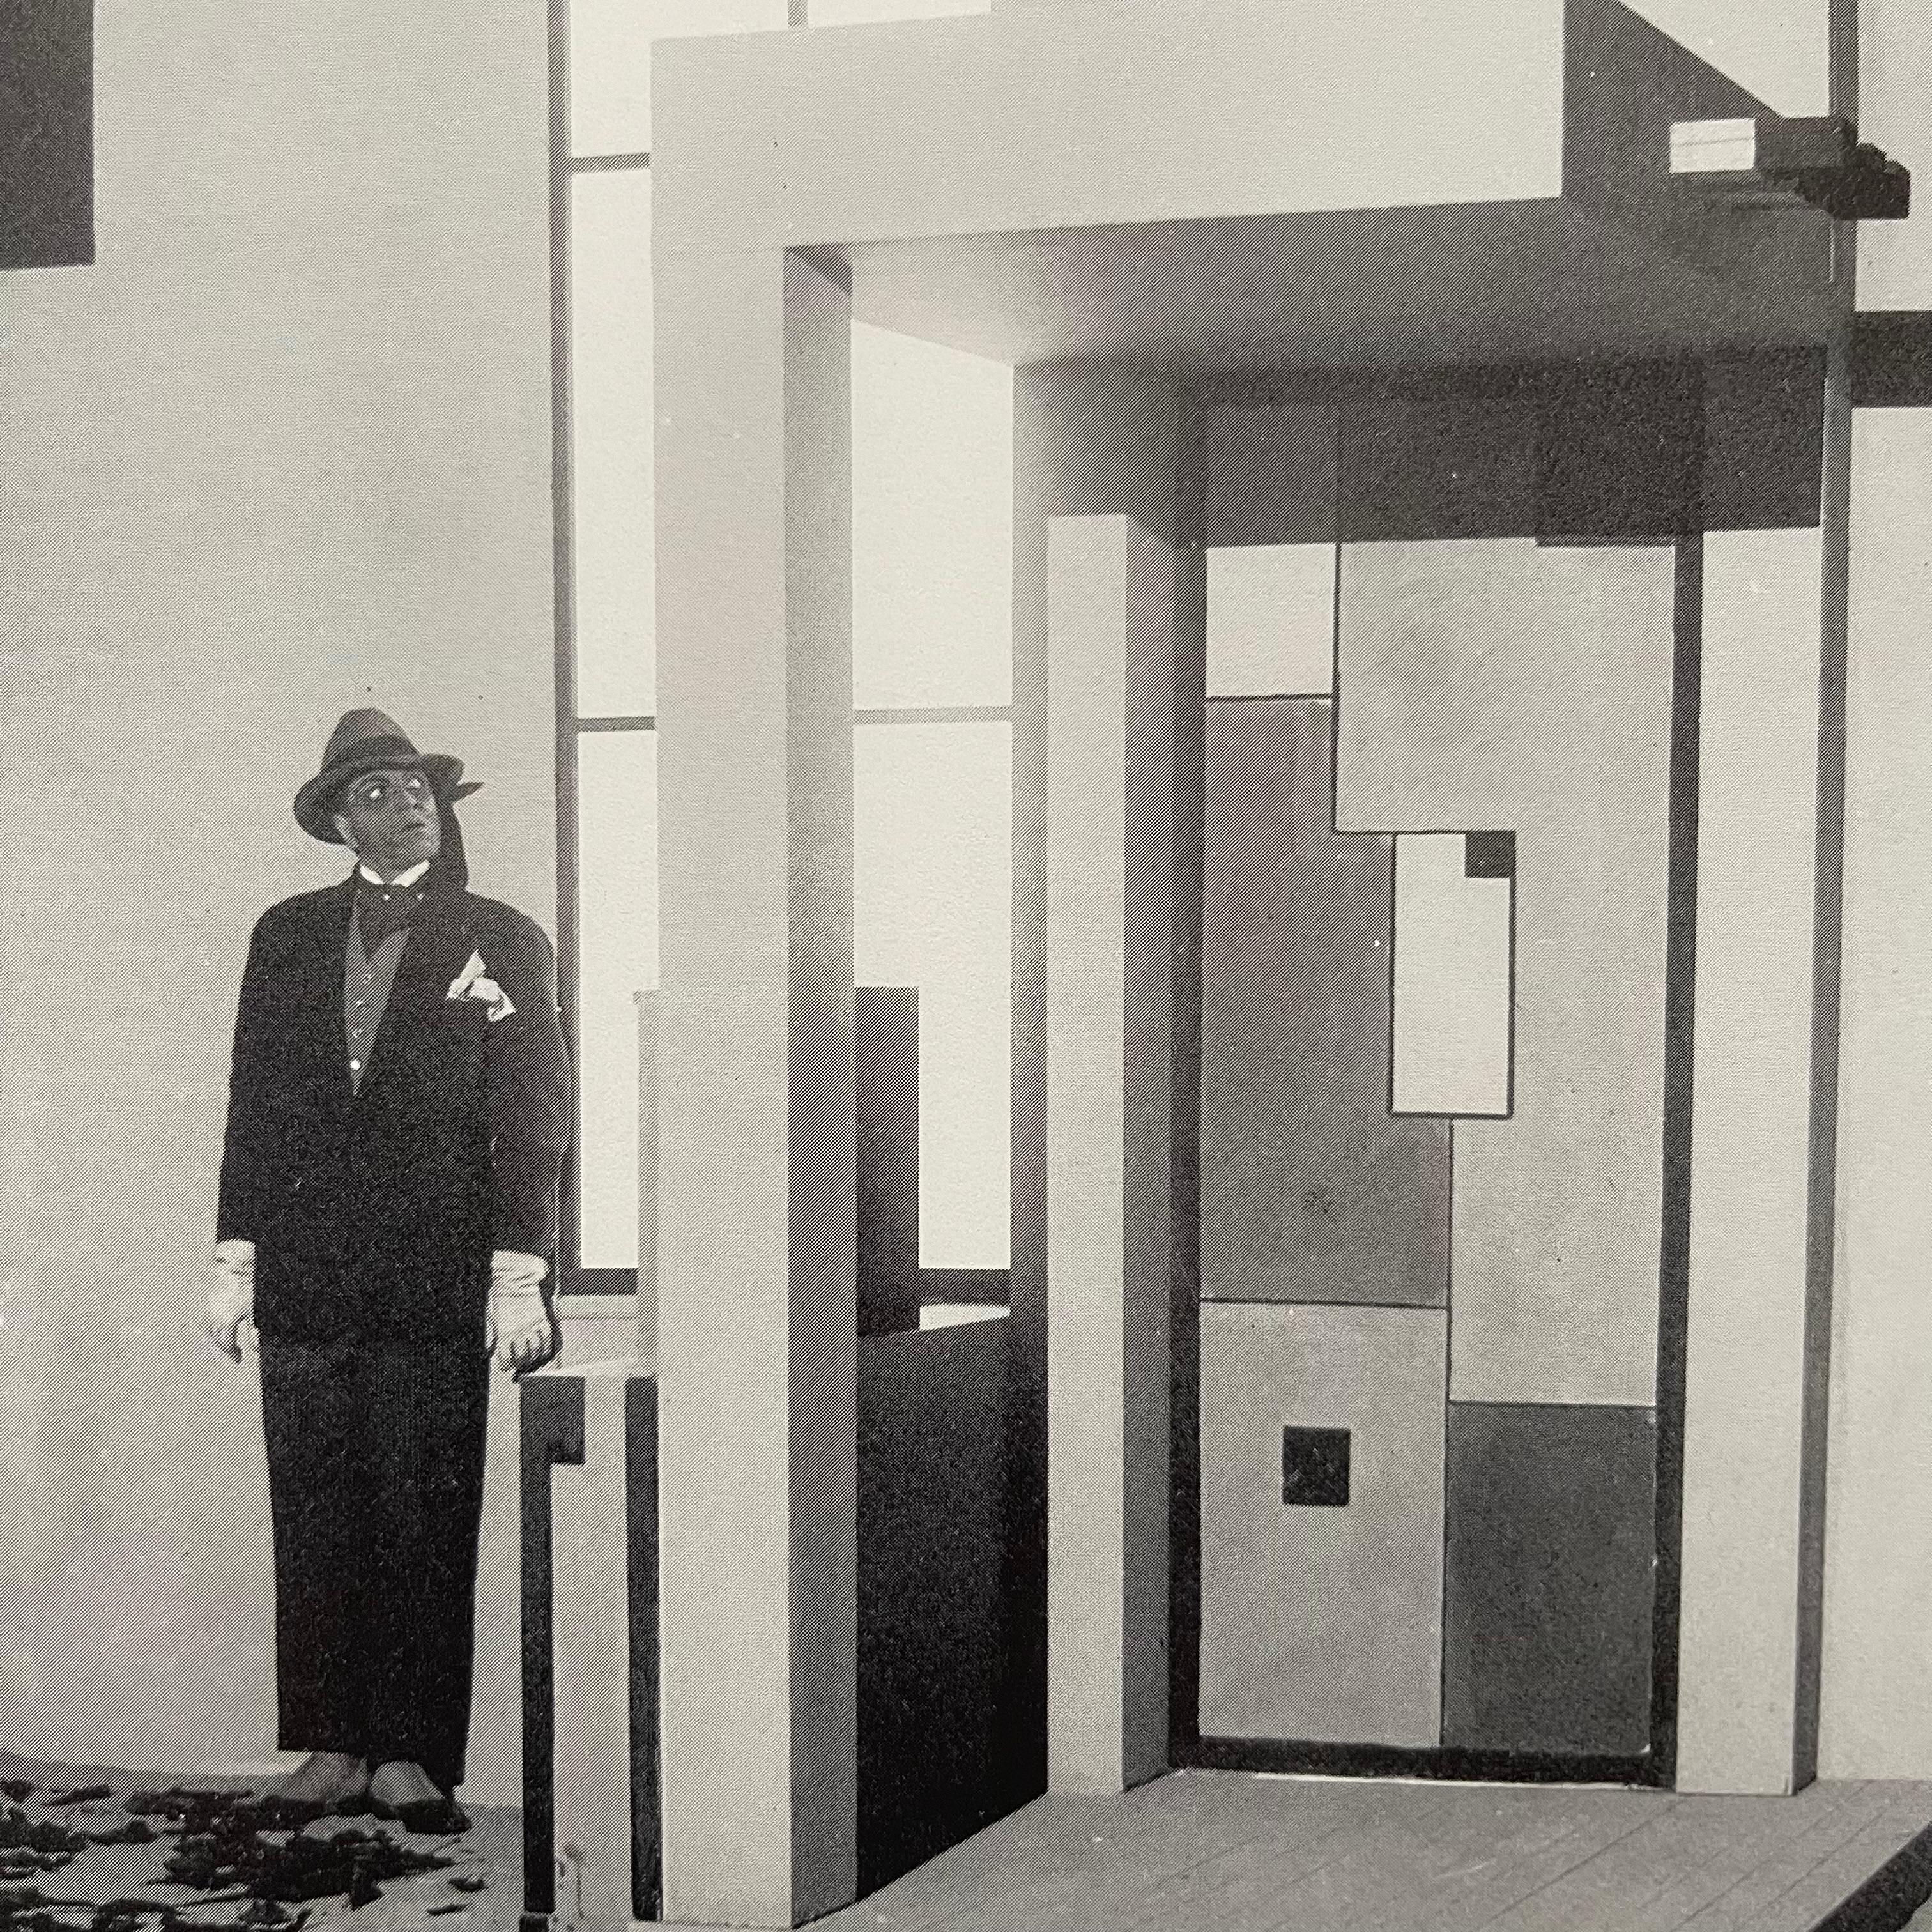 Published by the MIT Press Cambridge Massachusetts 1st US Edition 1990

Rob Mallet-Stevens was one of the more controversial architects of the modern movement and, along with Le Corbusier, the most influential figure in French architecture between